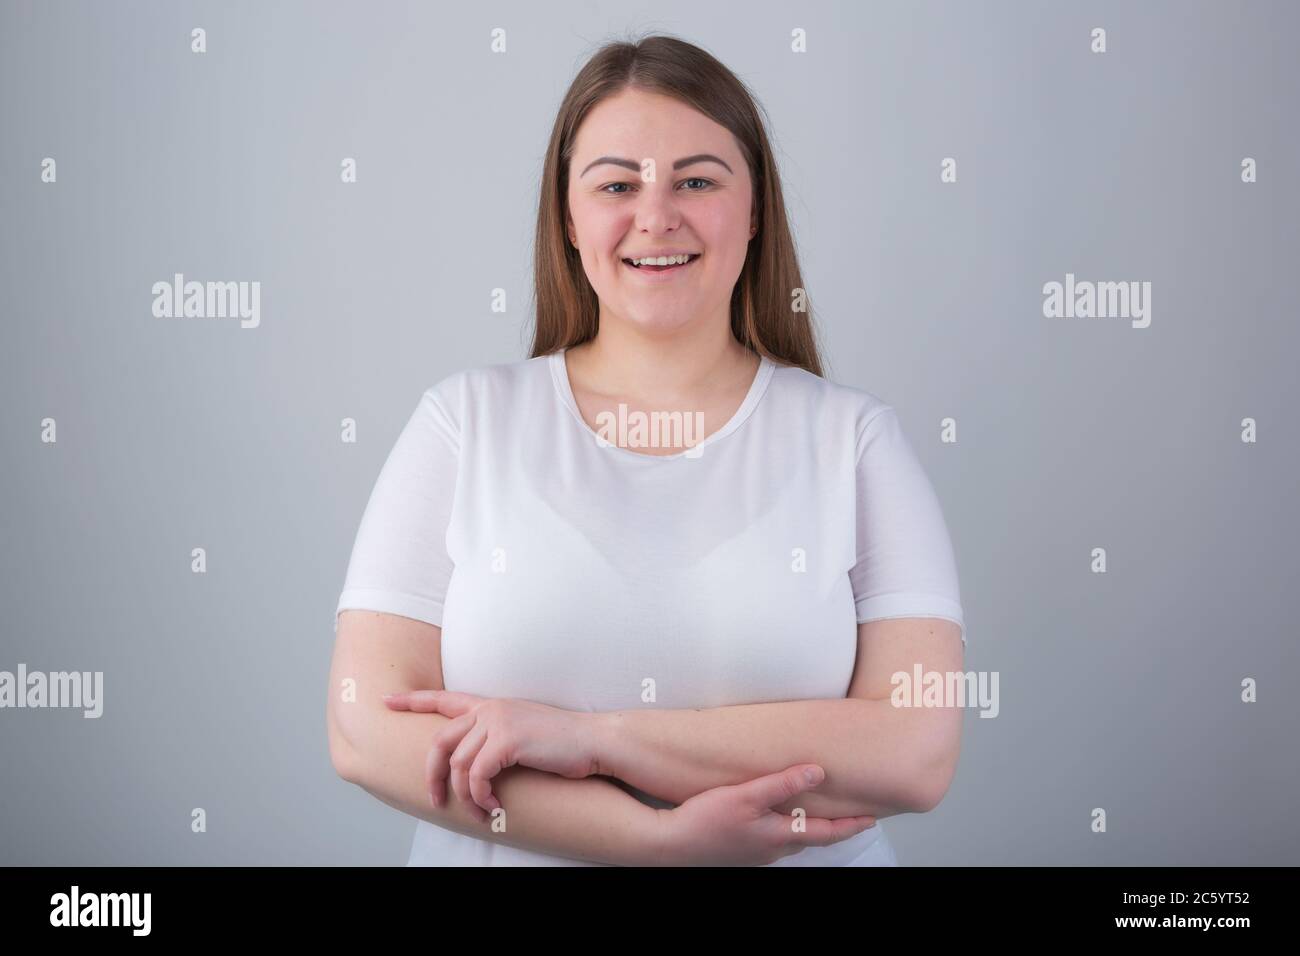 Happy plus size girl.Beautiful overweight young woman in early 30s posing in studio with friendly smile and crossed hands wearing casual white t-shirt Stock Photo